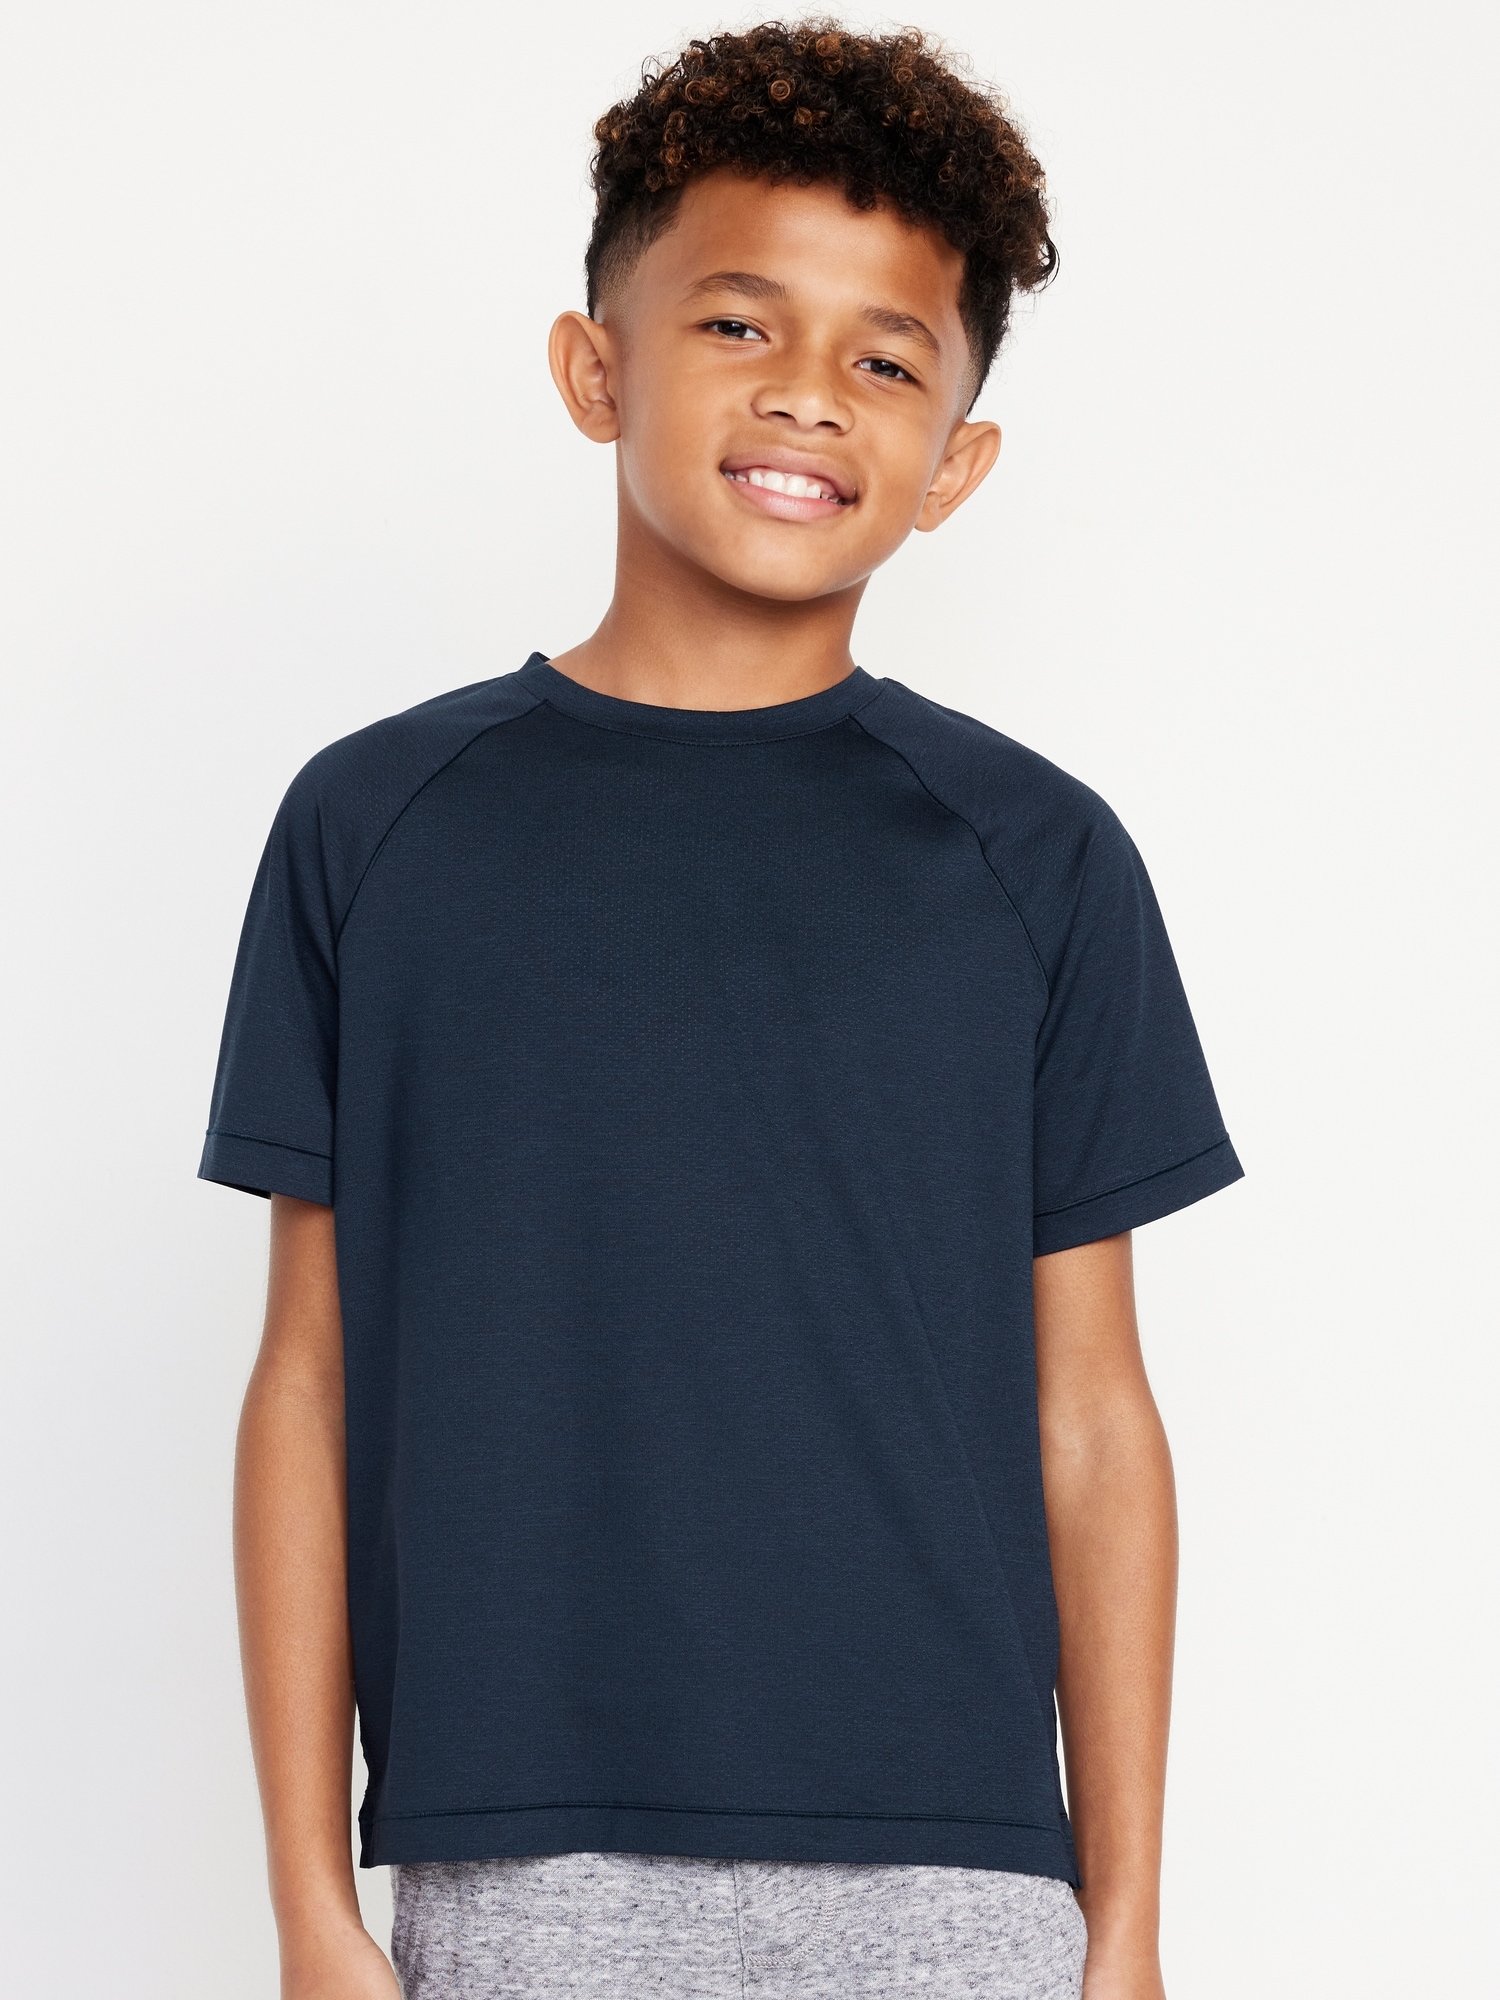 Go-Dry Cool Performance T-Shirt for Boys Hot Deal